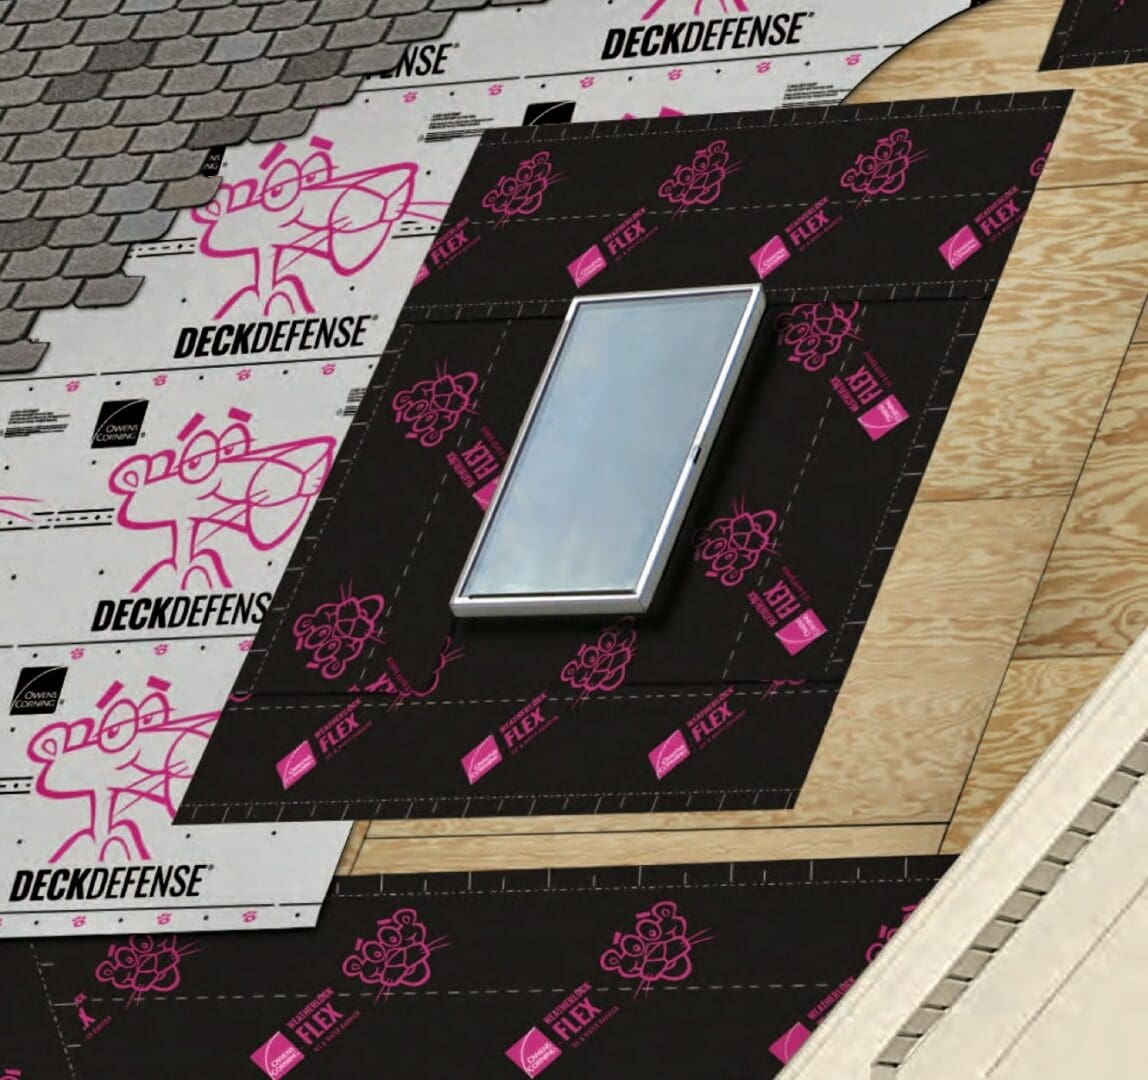 A close up of the roof with pink and black stickers